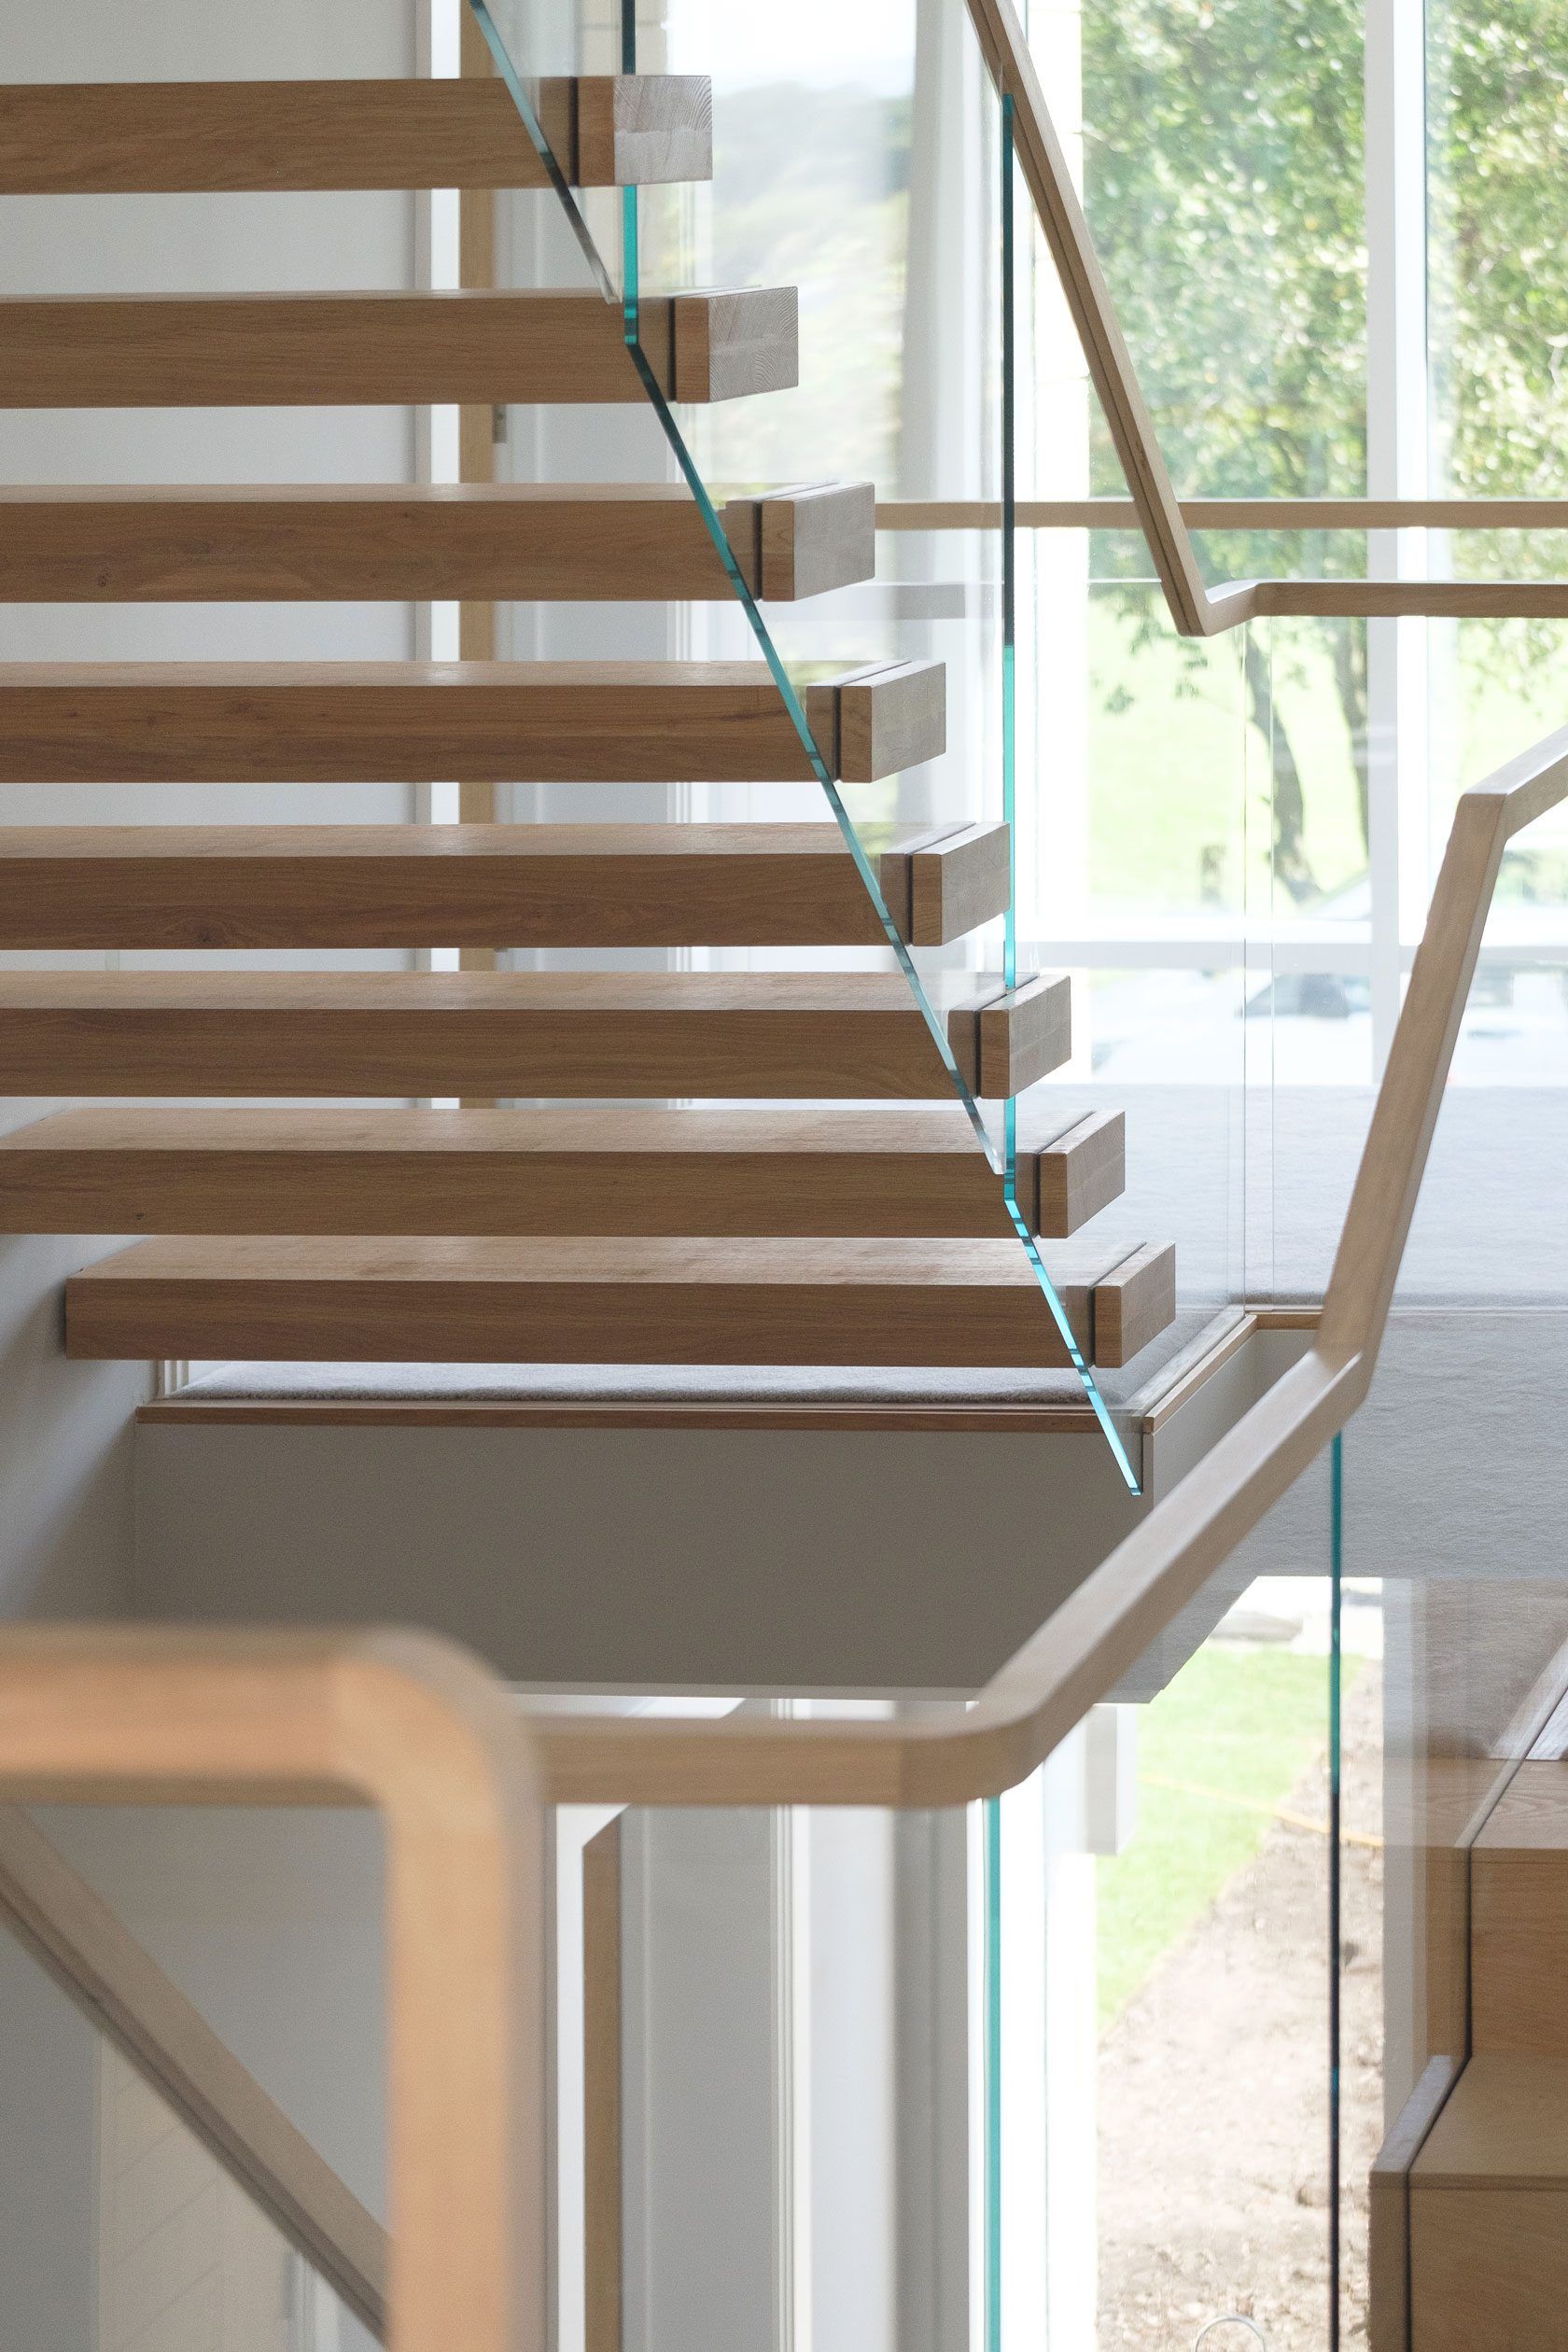 Underside of floating cantilevered oak staircase with glass balustrade. Grey walls and carpet with wood doors.